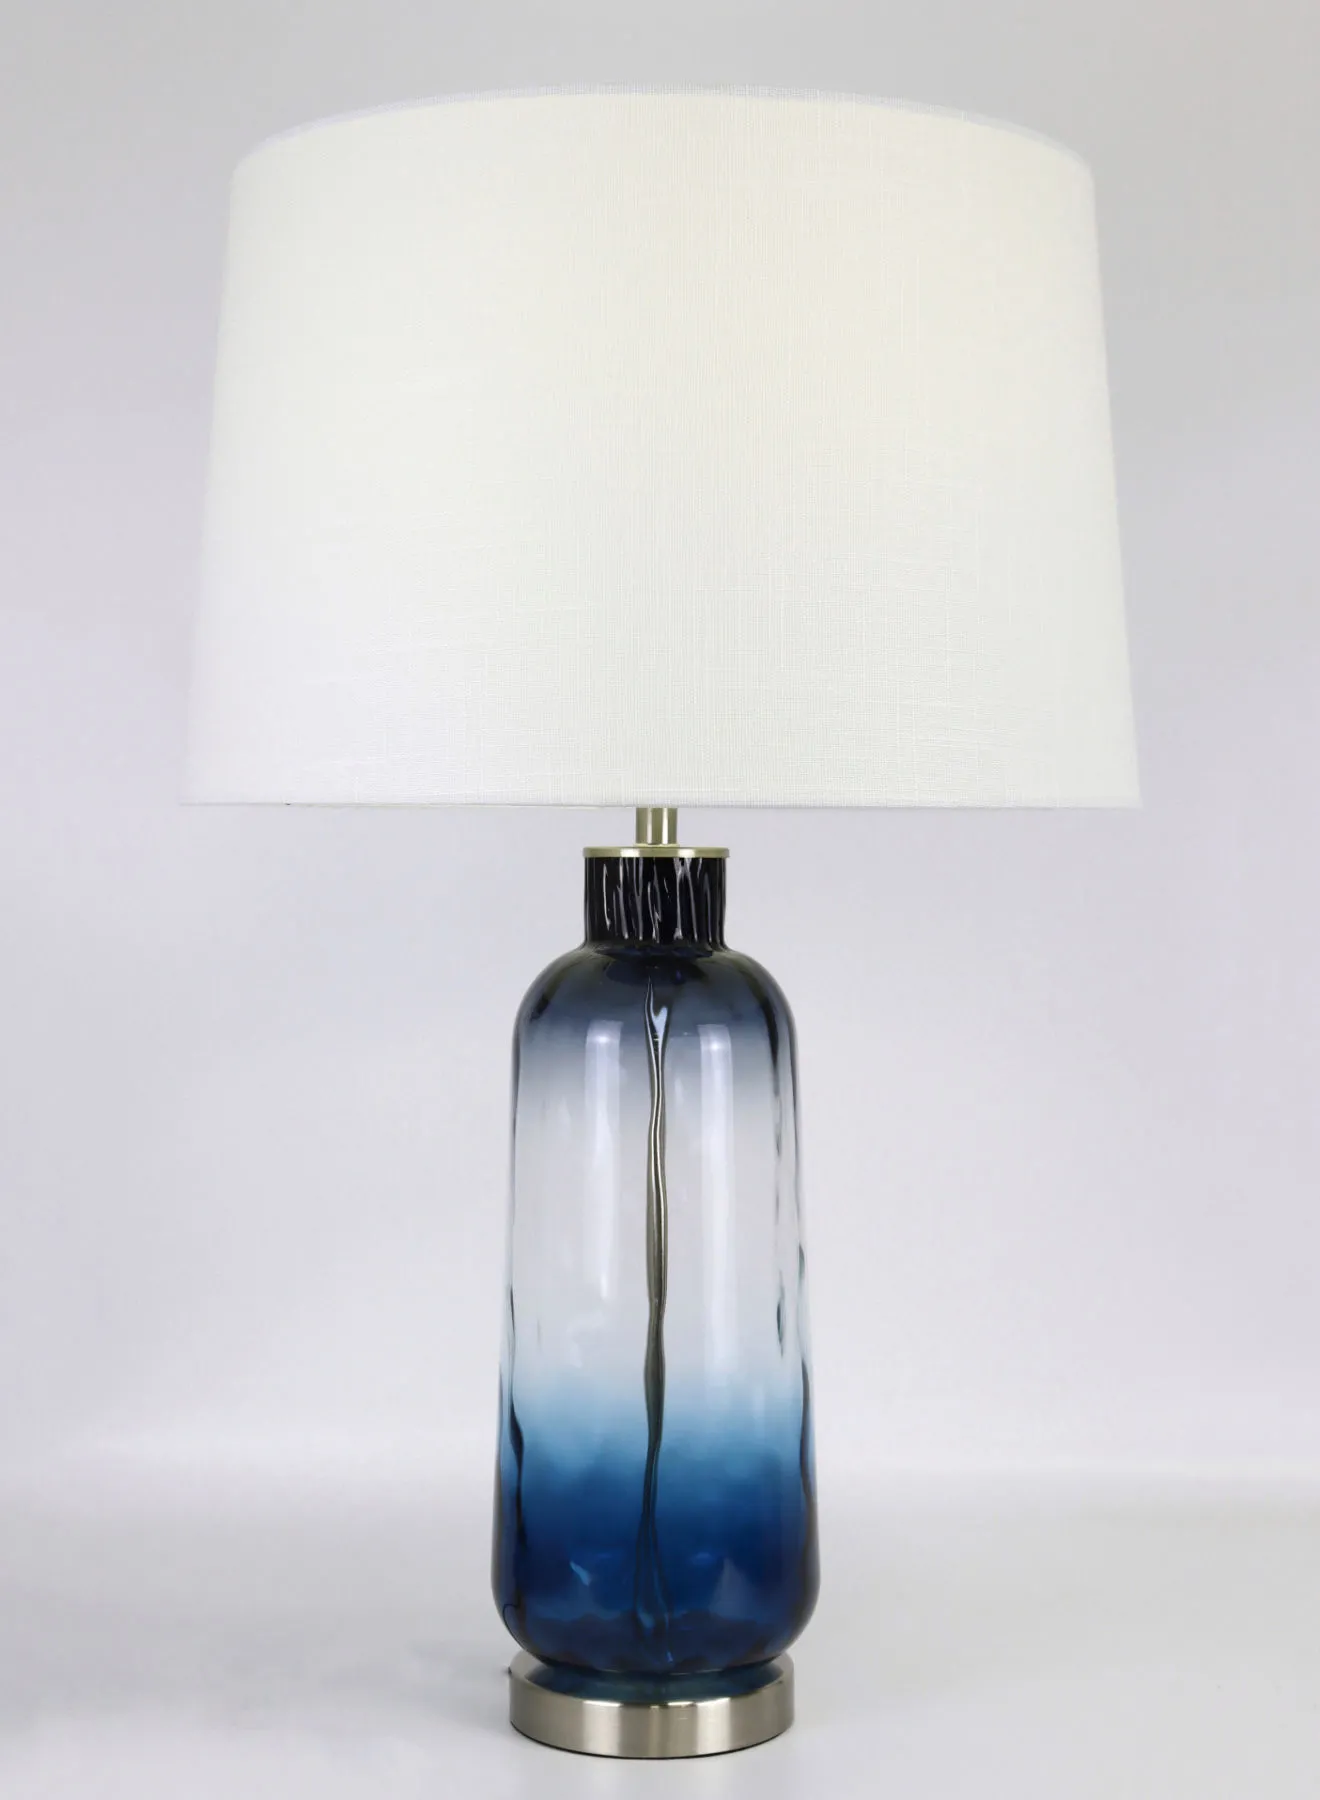 Switch Modern Design Glass Table Lamp Unique Luxury Quality Material for the Perfect Stylish Home RSN71031 Blue 17 x 27 Blue 17 x 27inch